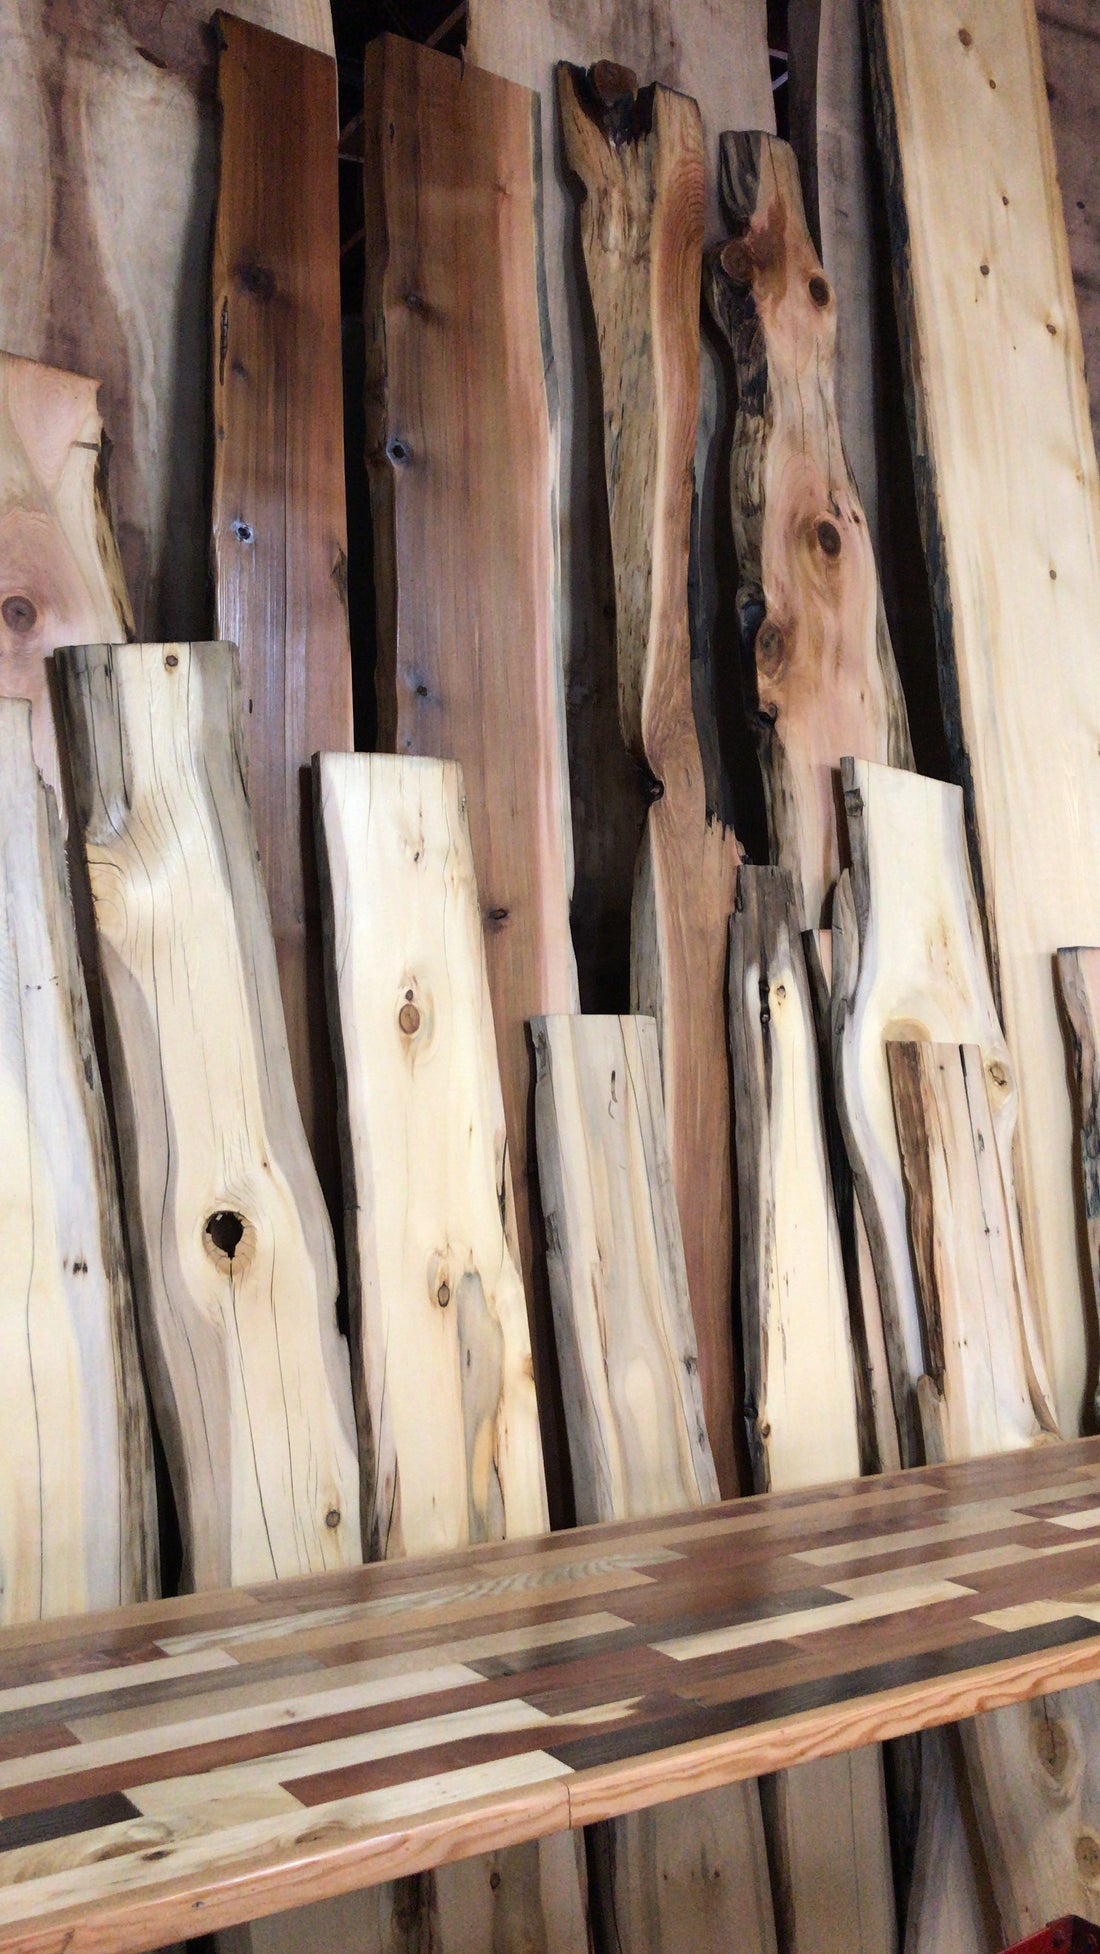 HOW TO CHOOSE THE RIGHT WOOD FOR YOUR PROJECT